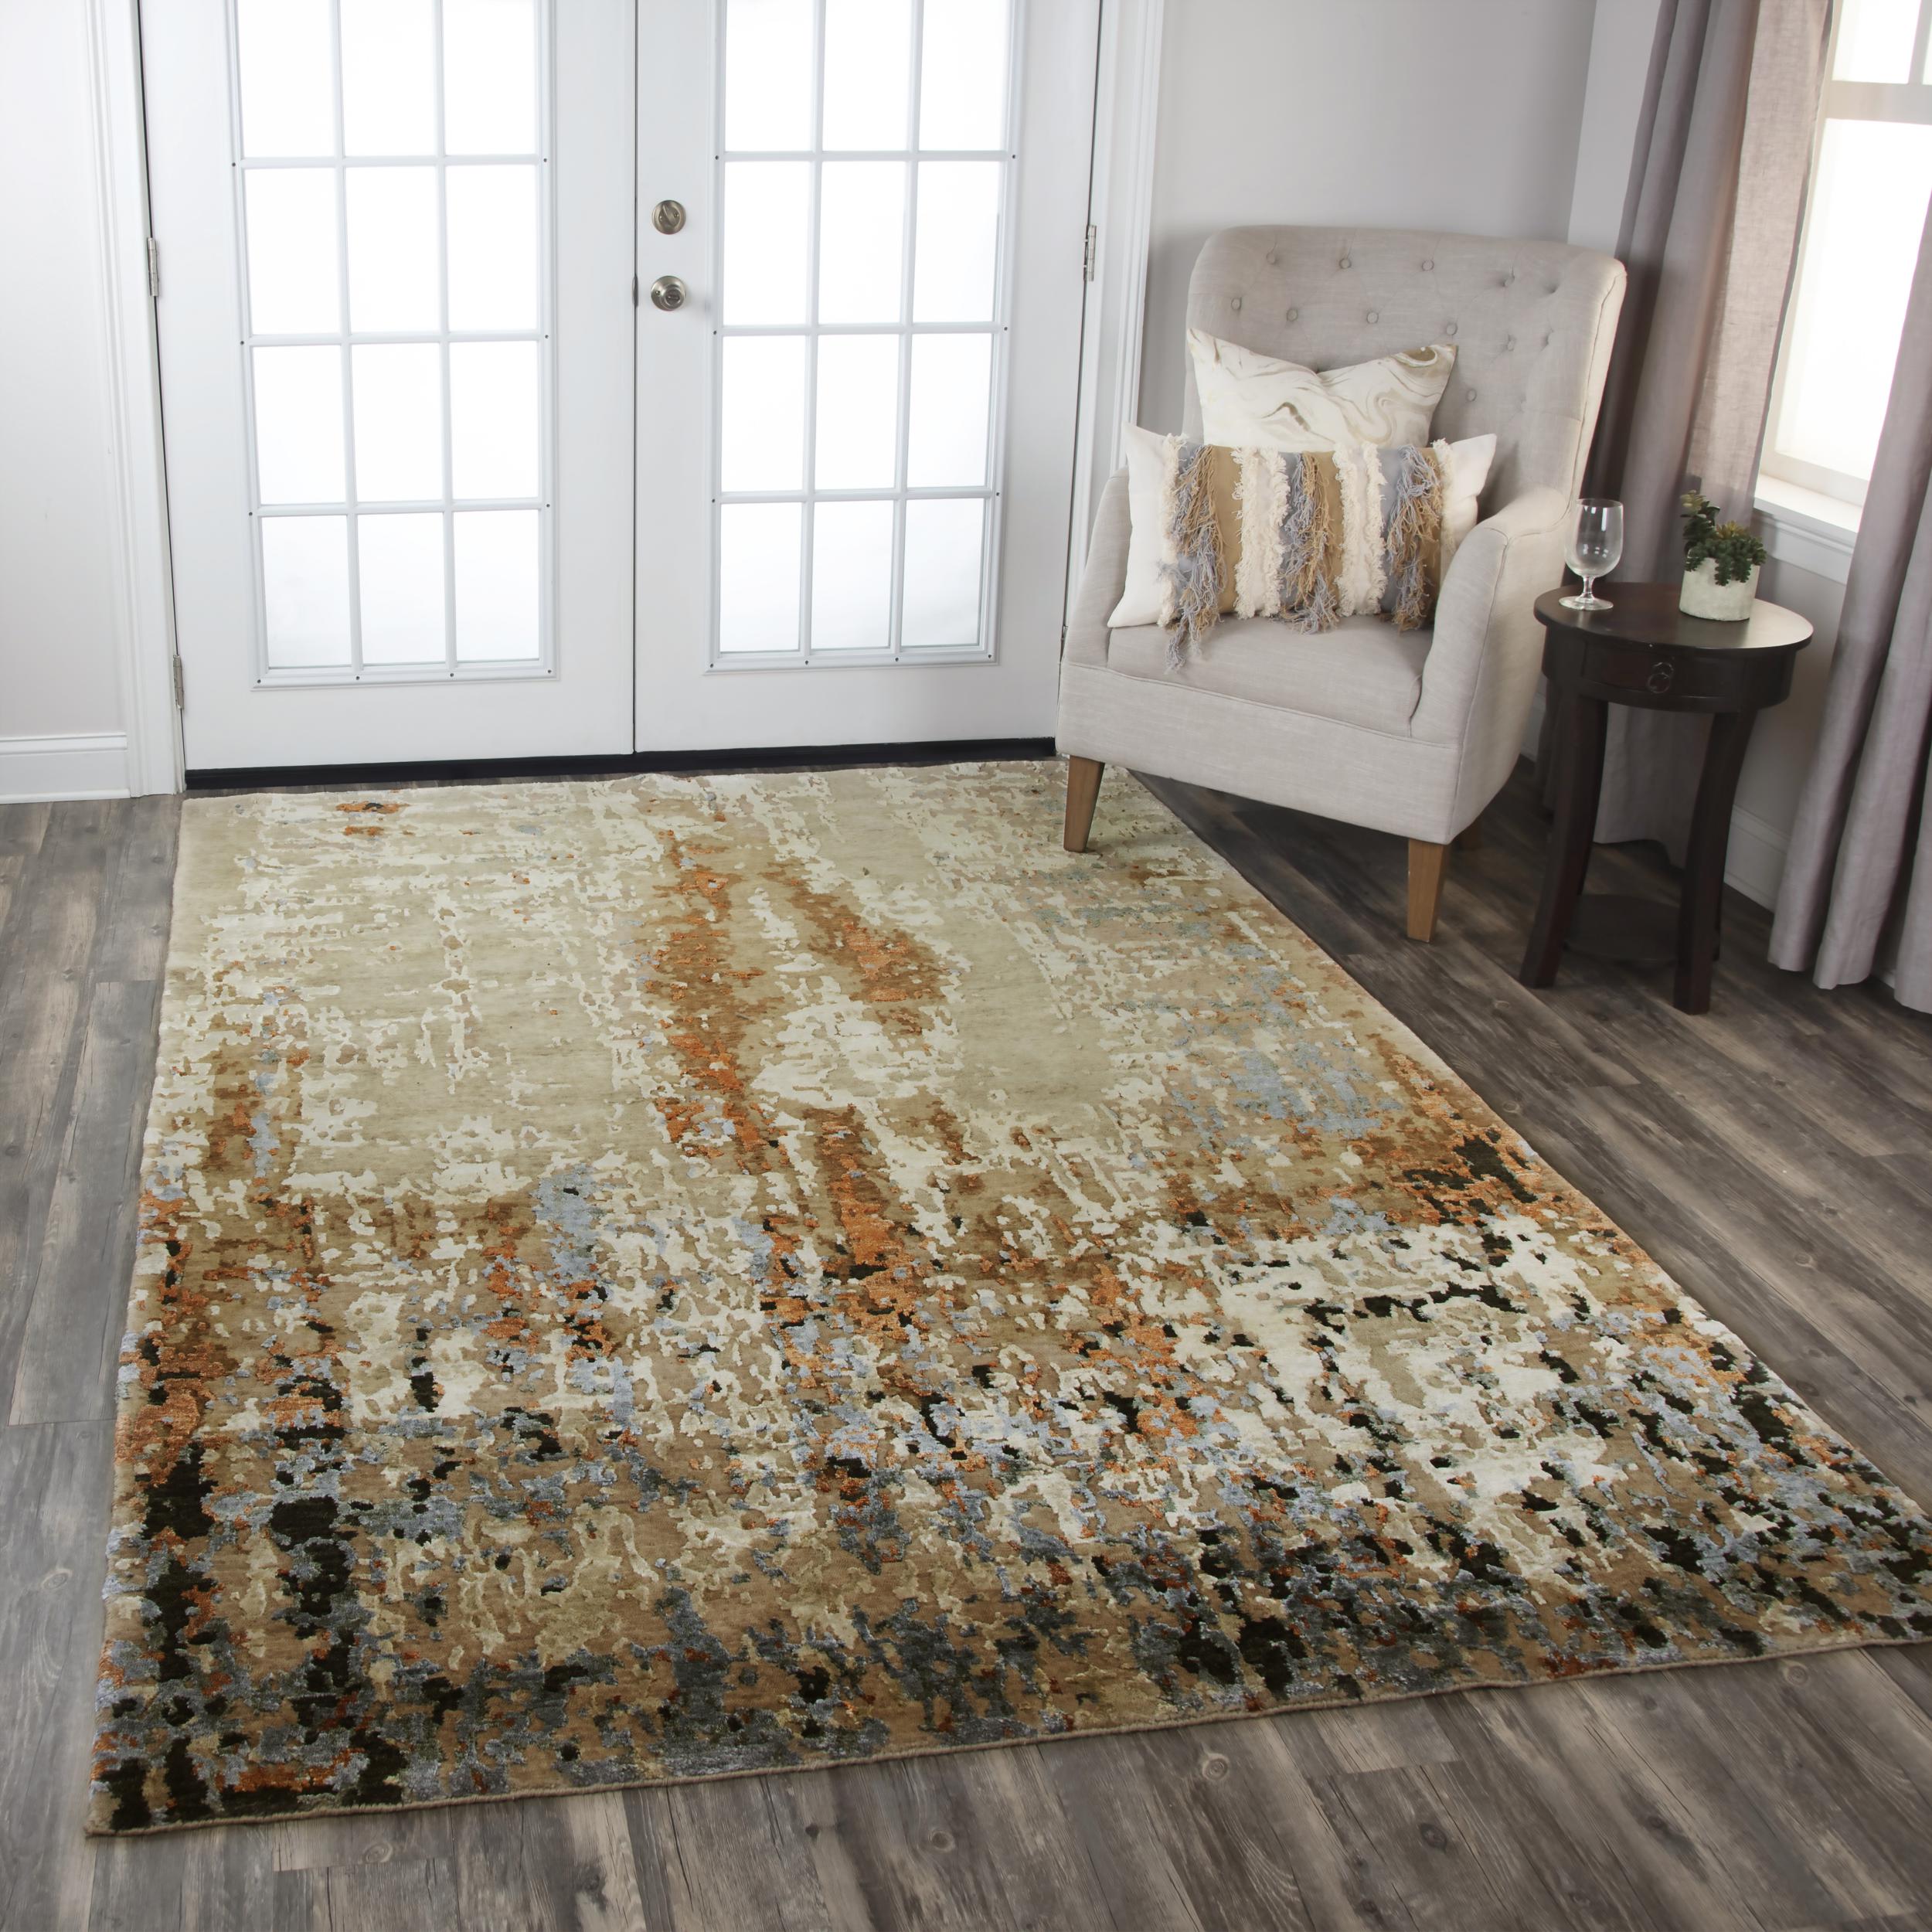 Pinbeam Area Rug Abstract Old Natural Brown Barn Wood Wall Wooden Home  Decor Floor Rug 3' x 5' Carpet